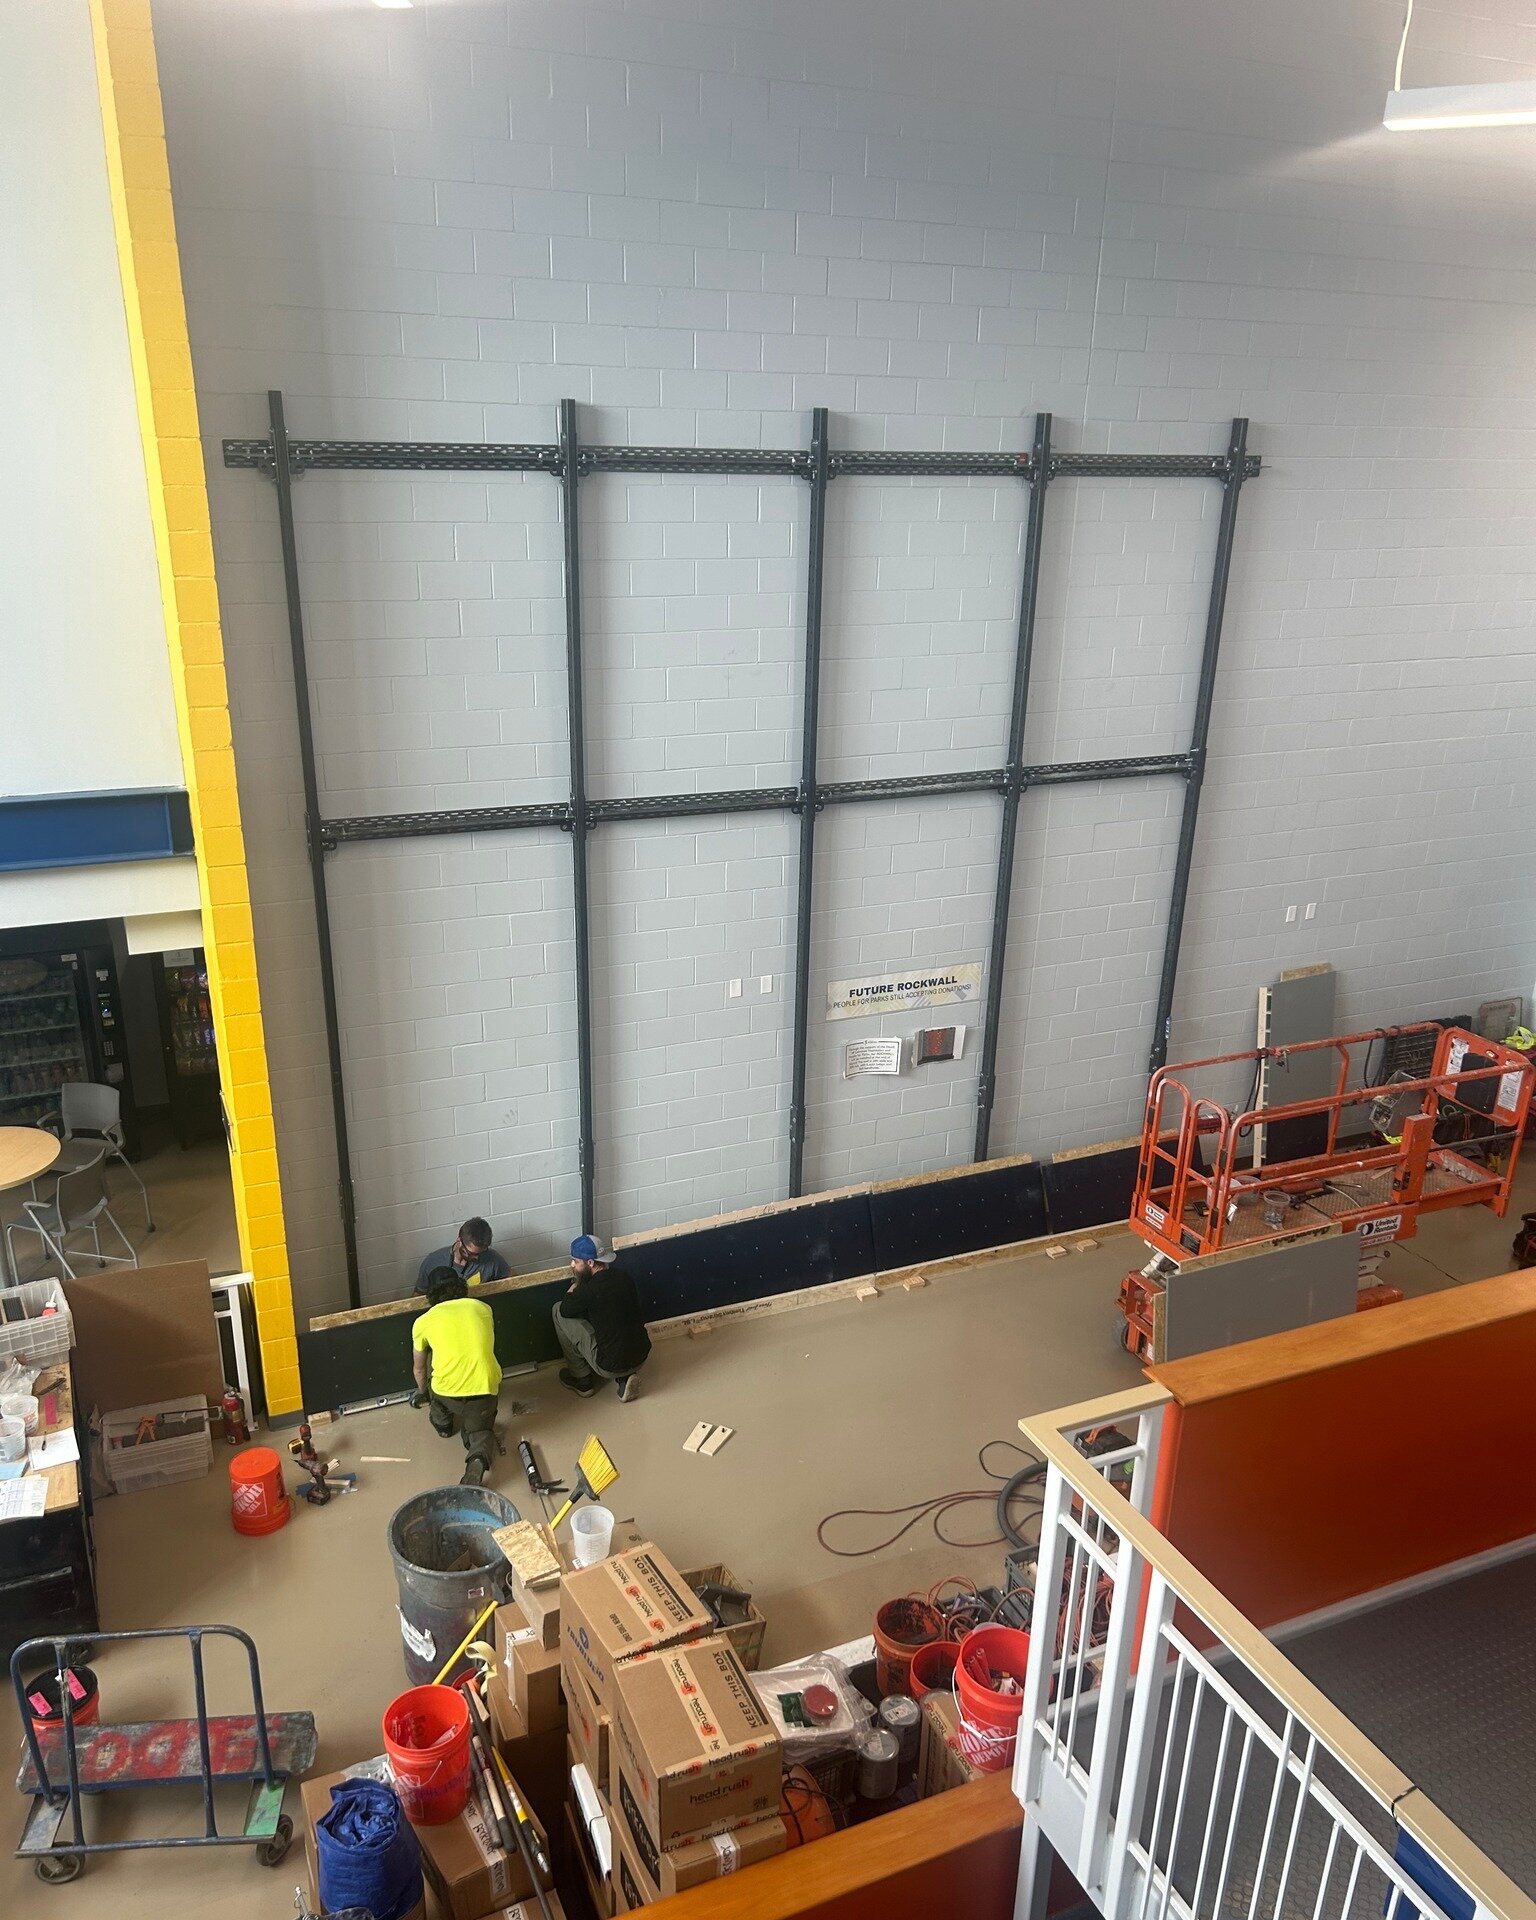 Major progress on the wall! Who's excited to climb the finished product? We are working on scheduling open climb hours...more details coming soon.